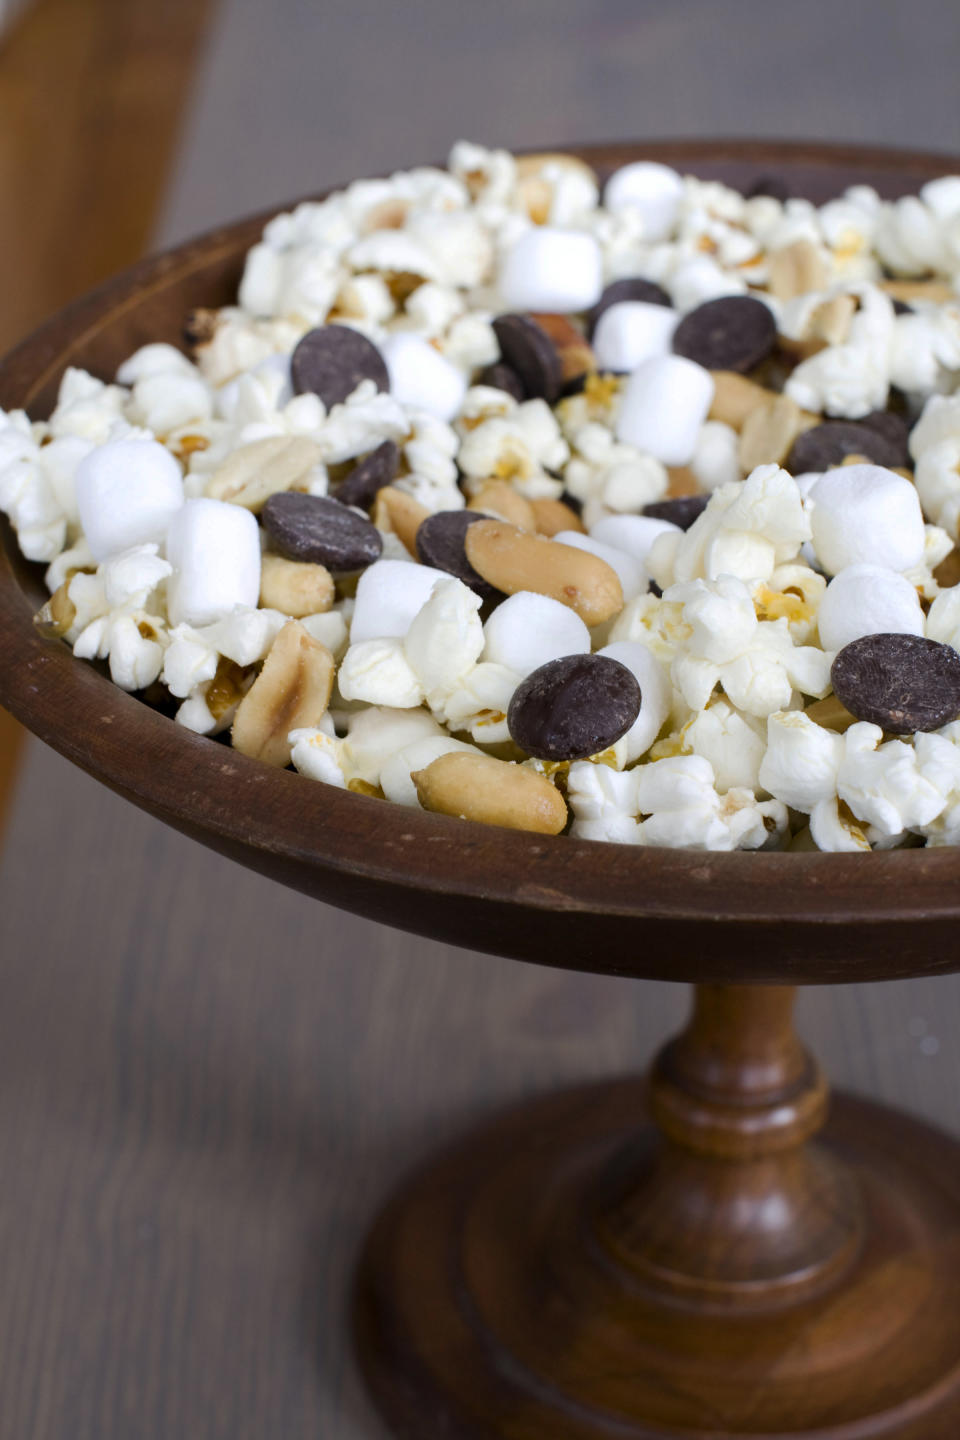 In this image taken on Jan. 28, 2013, the recipe for Stovetop Popcorn Many Ways with mini marshmallows, chocolate chips and salted peanuts is shown in Concord, N.H. (AP Photo/Matthew Mead)